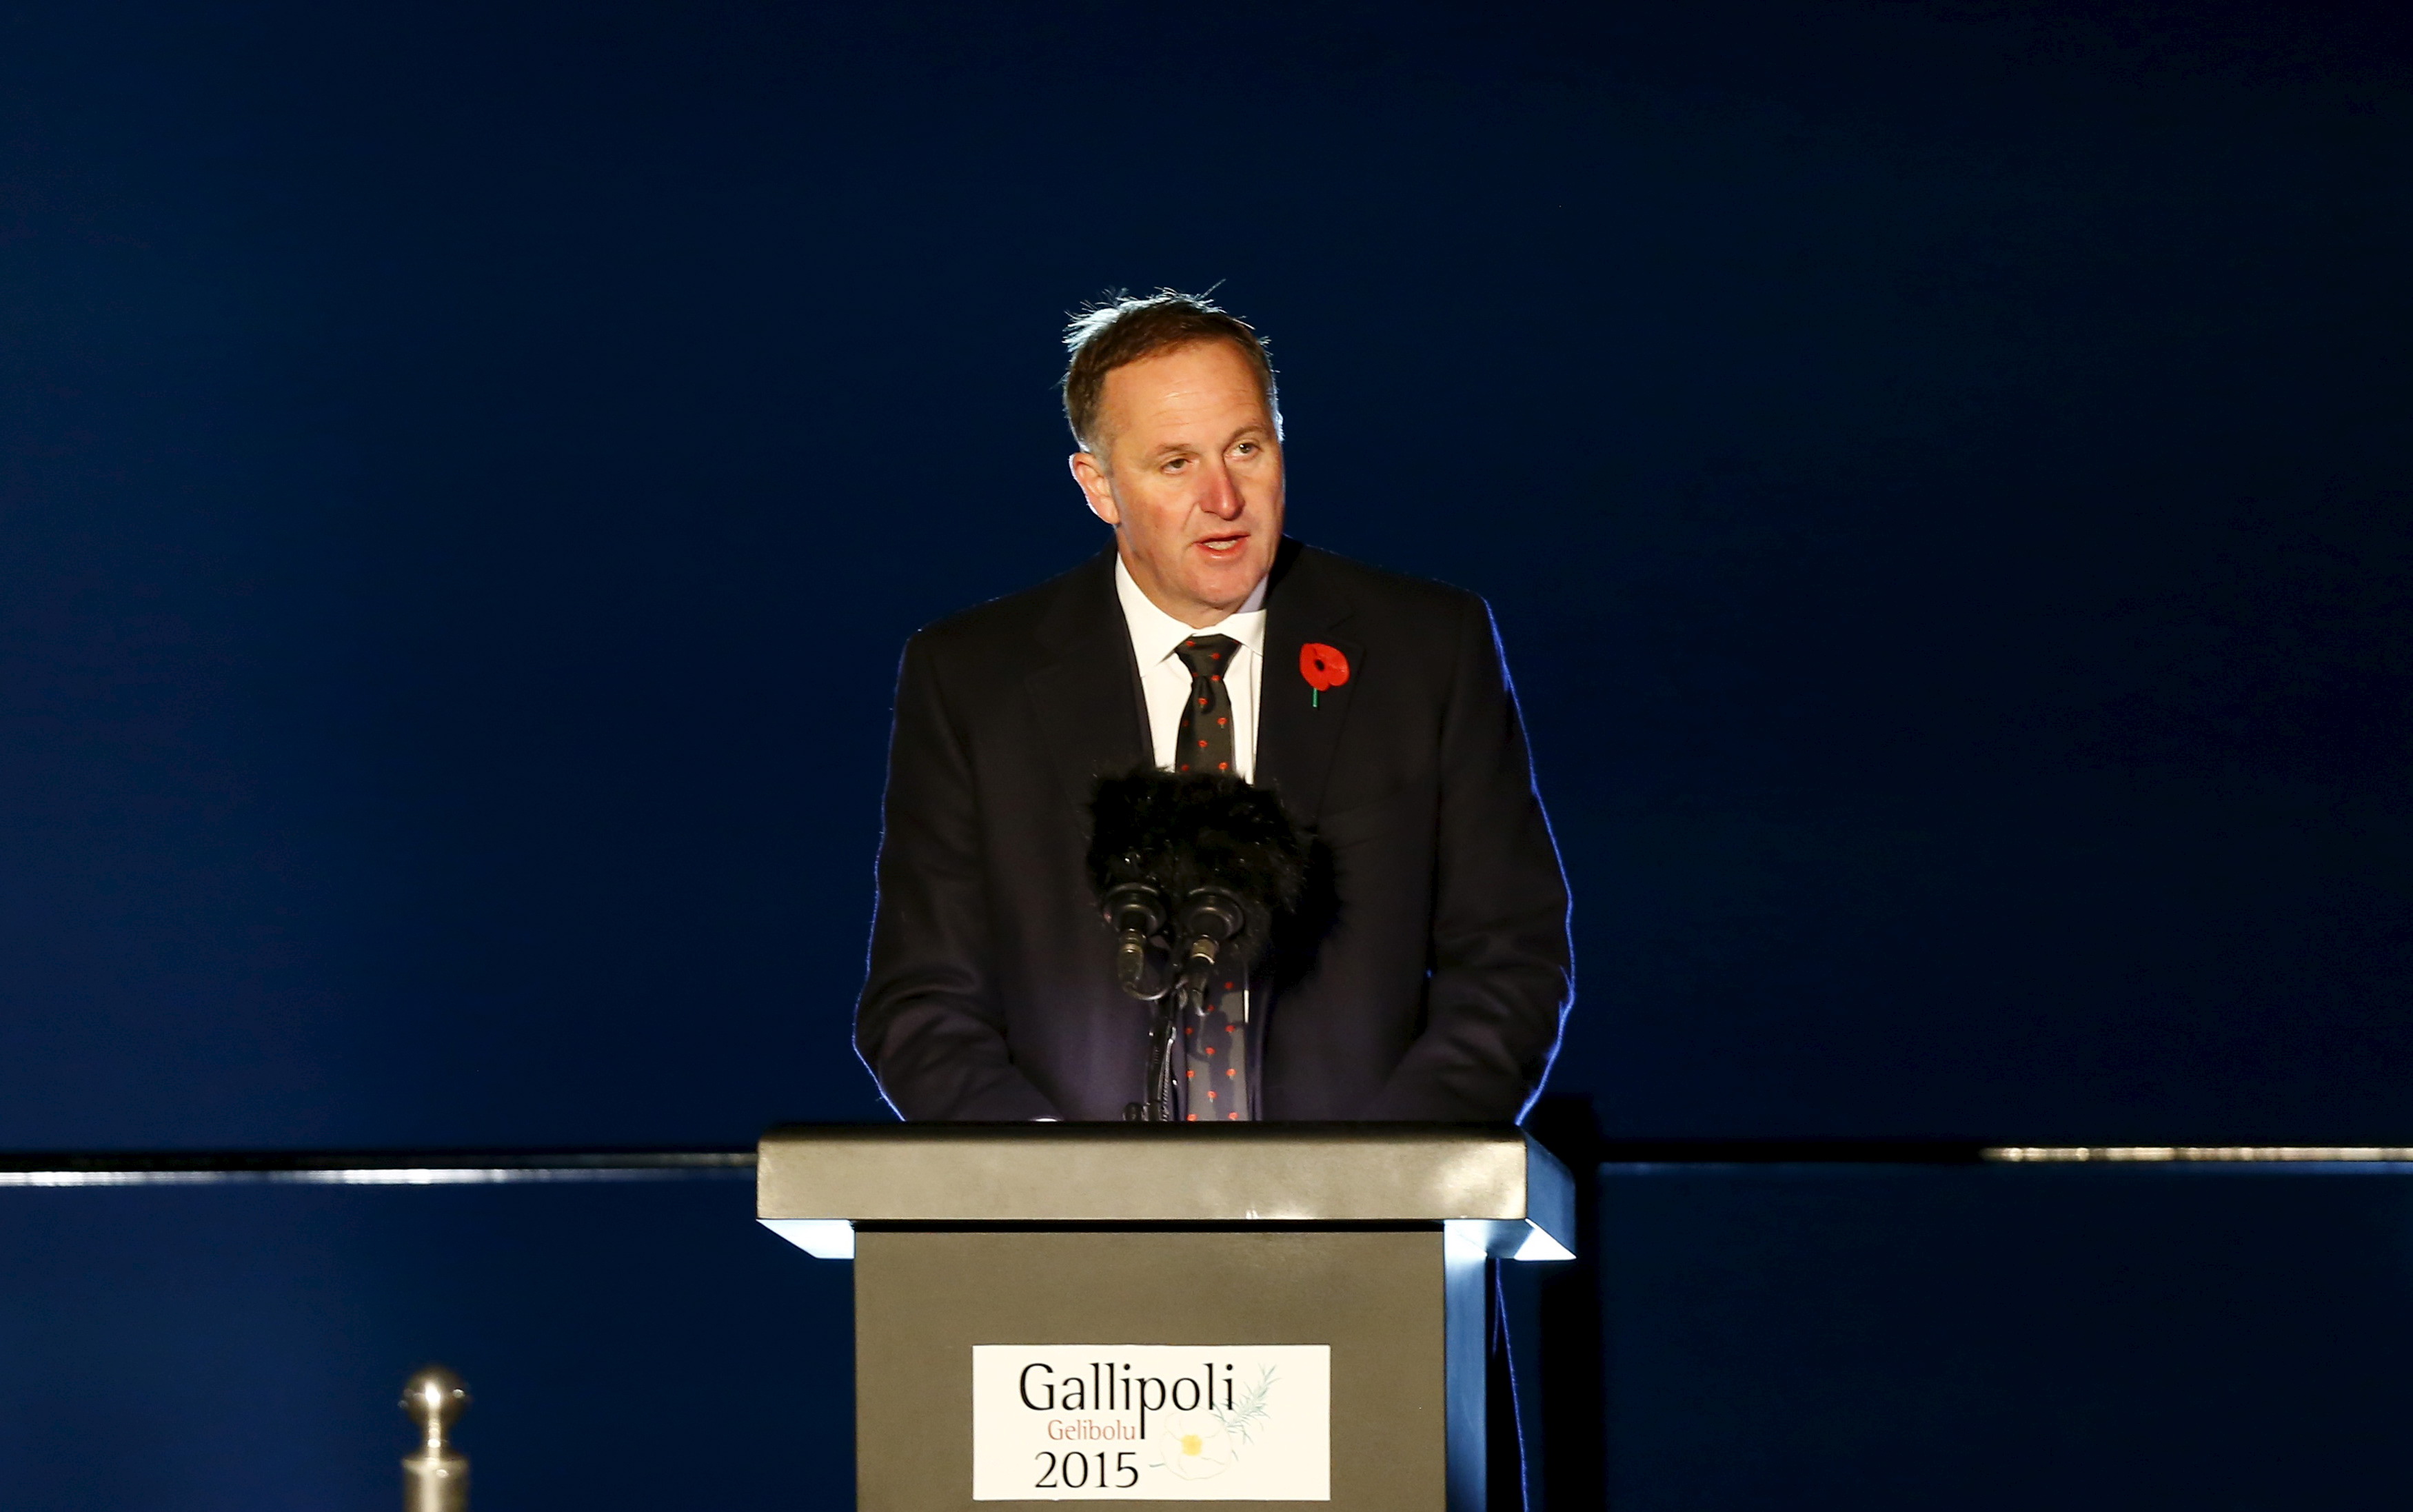 New Zealand's Prime Minister John Key speaks during a dawn ceremony marking the 100th anniversary of the Battle of Gallipoli, at Anzac Cove in Gallipoli April 25, 2015 (Osman Orsal—Reuters)